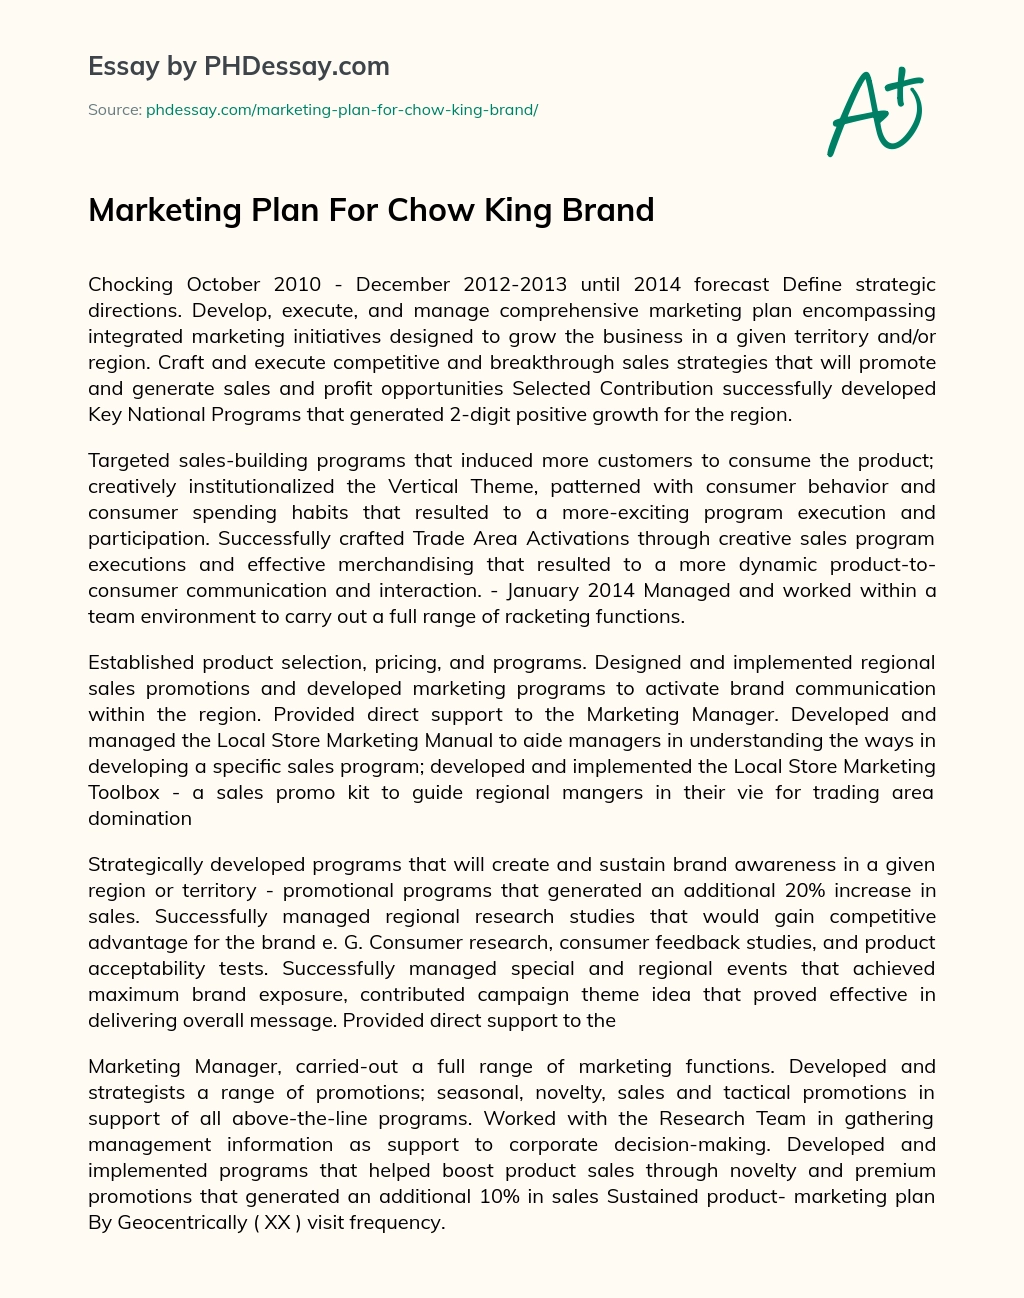 Marketing Plan For Chow King Brand essay